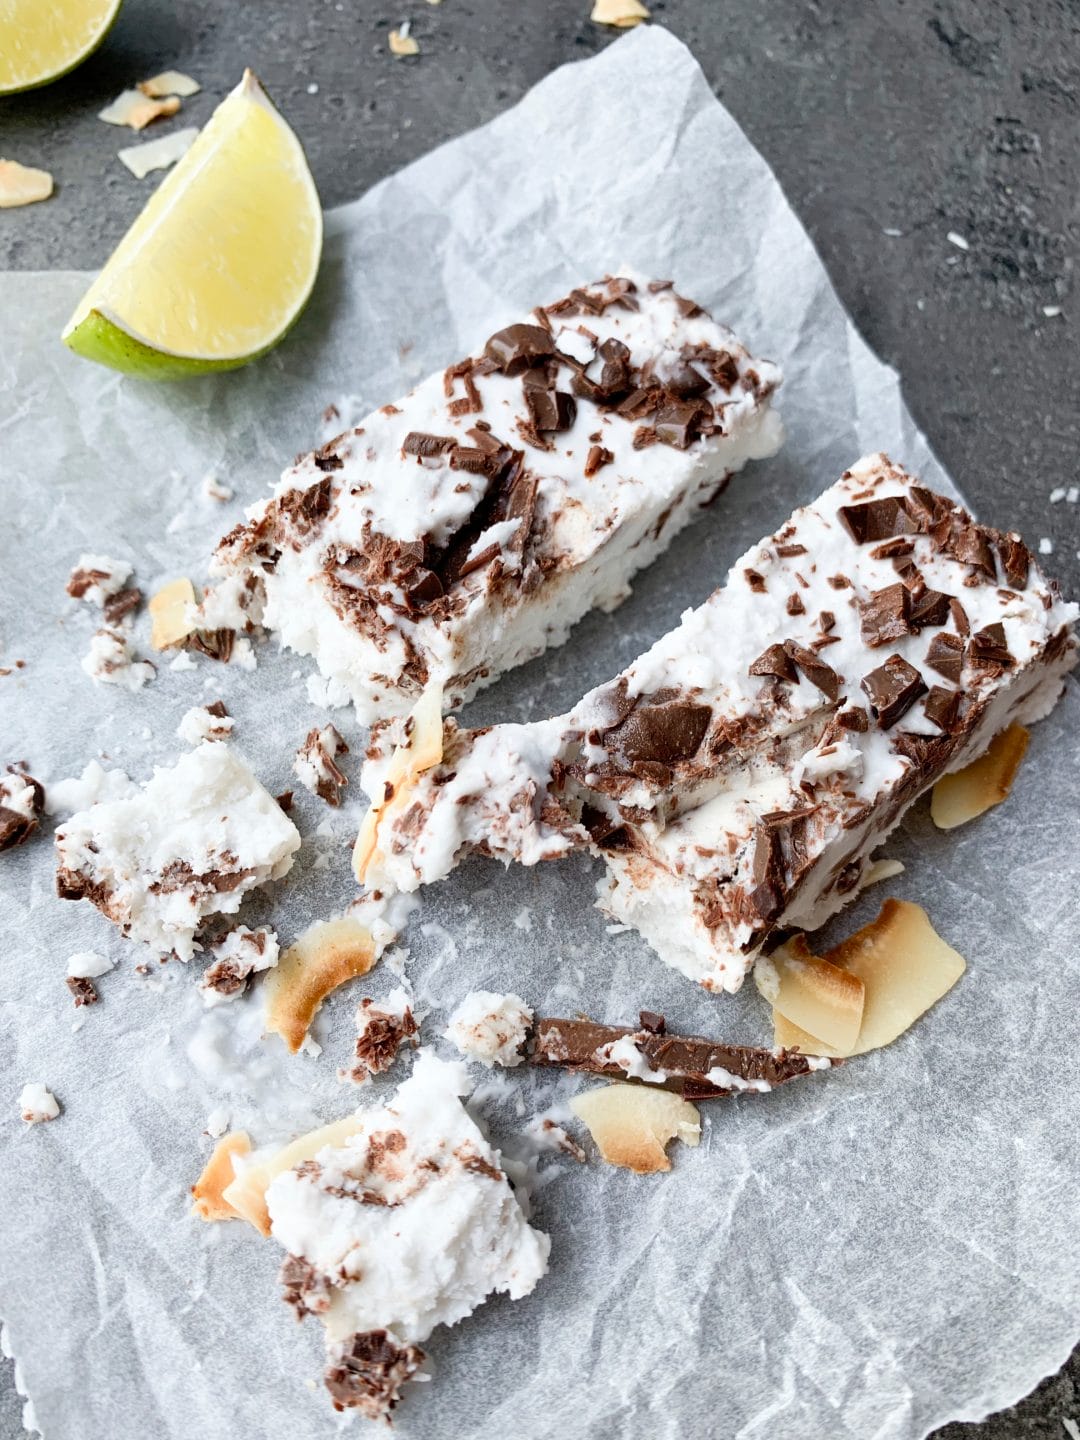 Coconut ice cream cake Bounty bars on the parchment paper